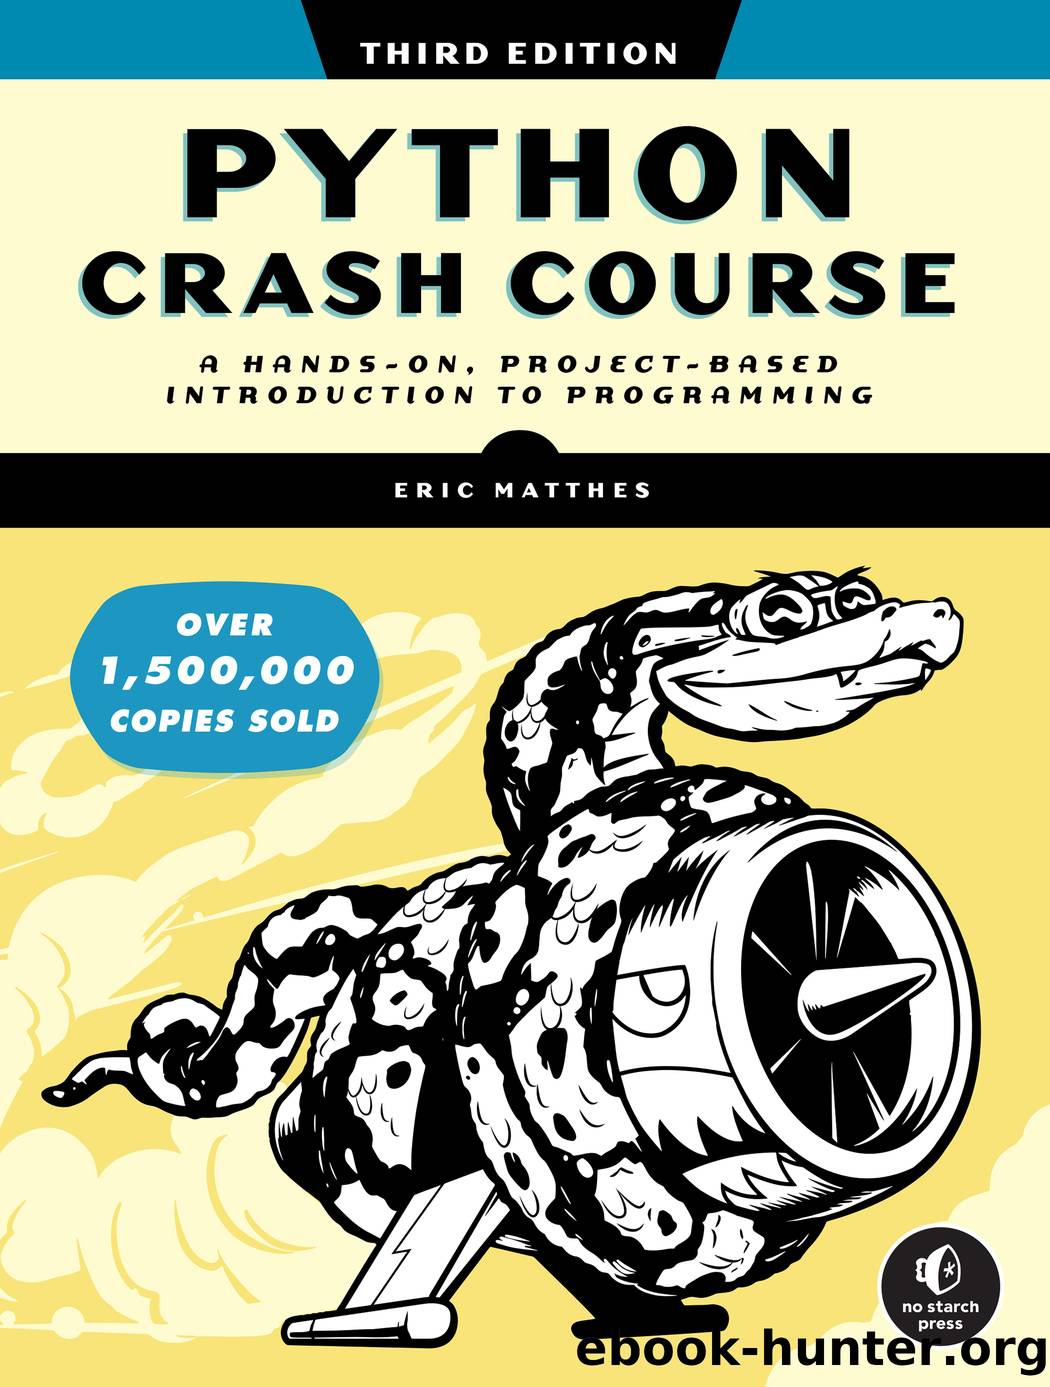 Python Crash Course, 3rd Edition by Eric Matthes